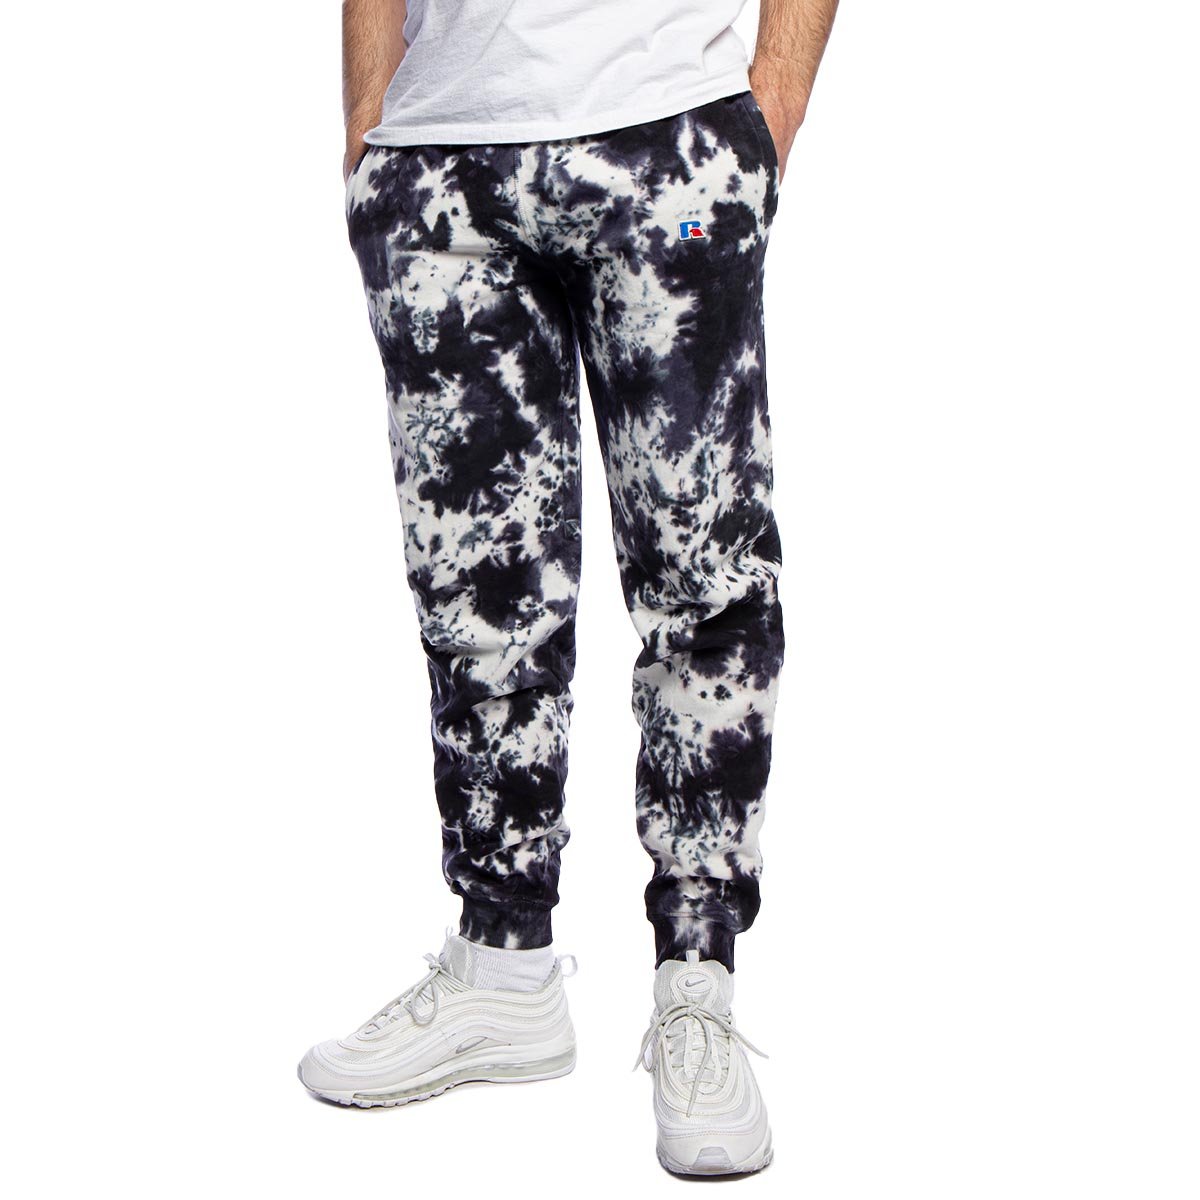 Russell Athletic Joggers Sweatpants black/white